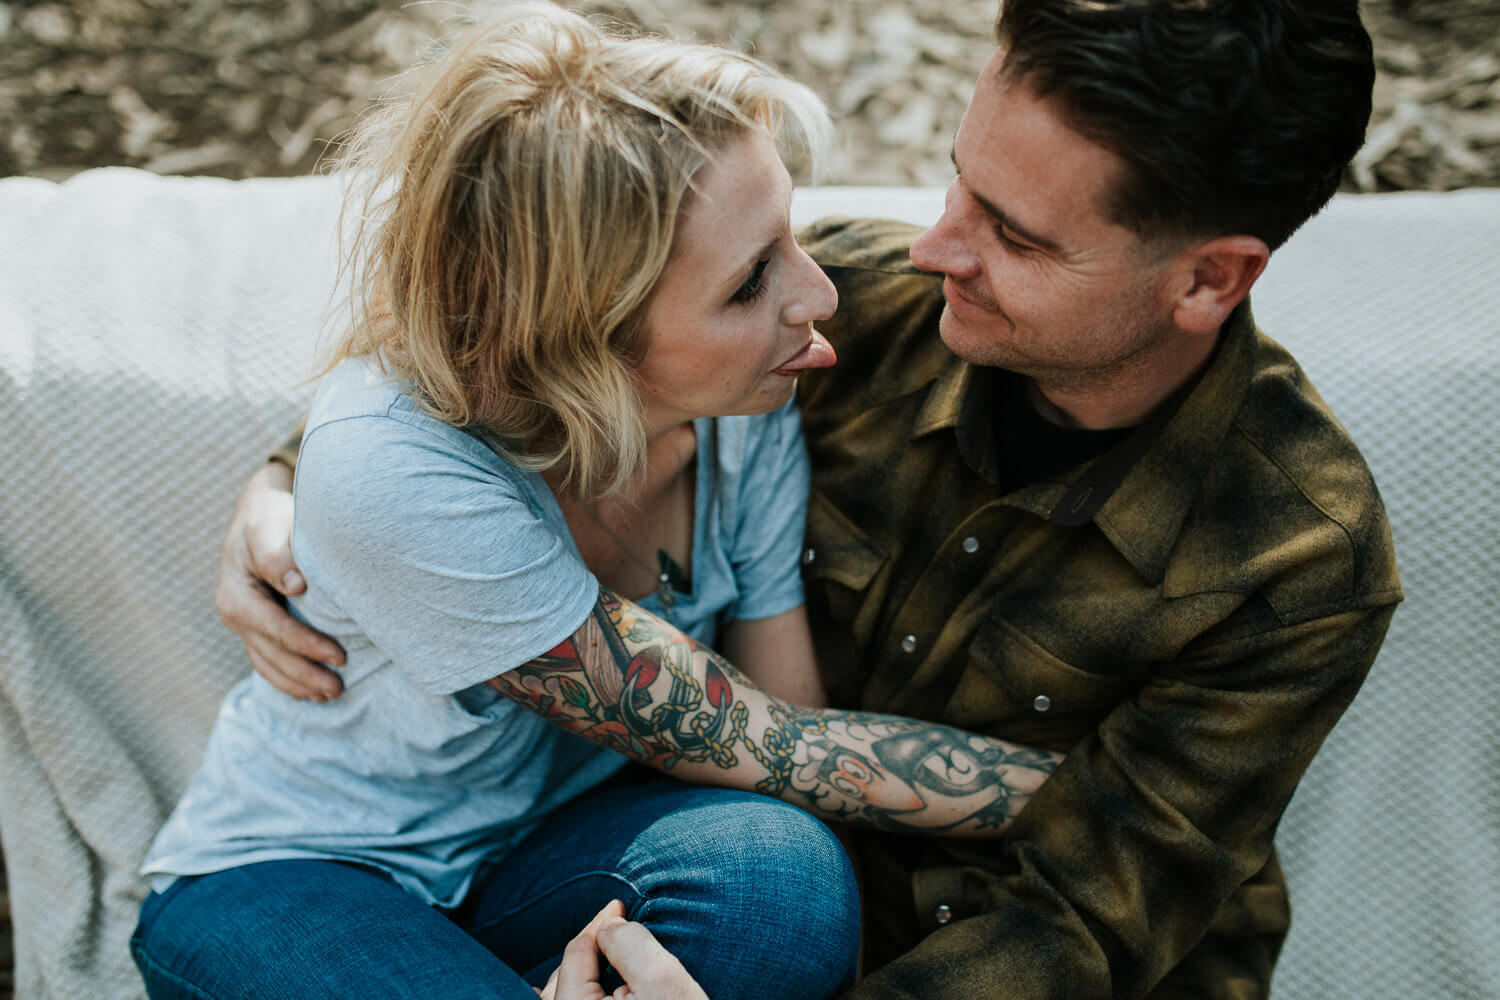 This Baker Beach Engagement shoot was so fun, candid, and natural.